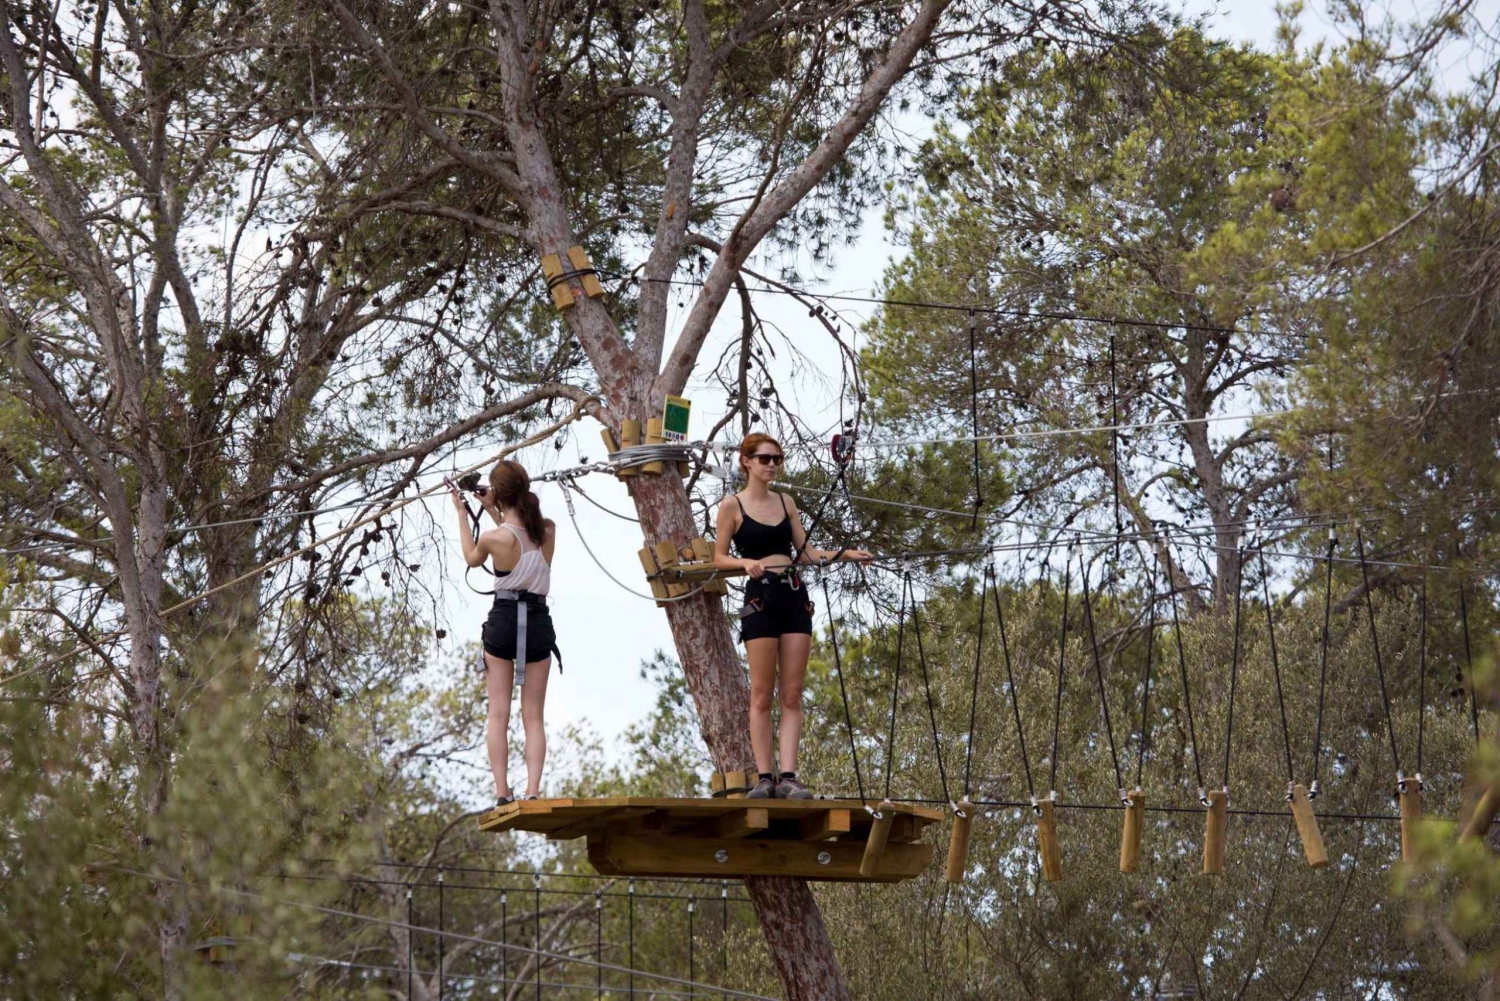 Palma: Family or Sports Course Adventure at Forestal Park